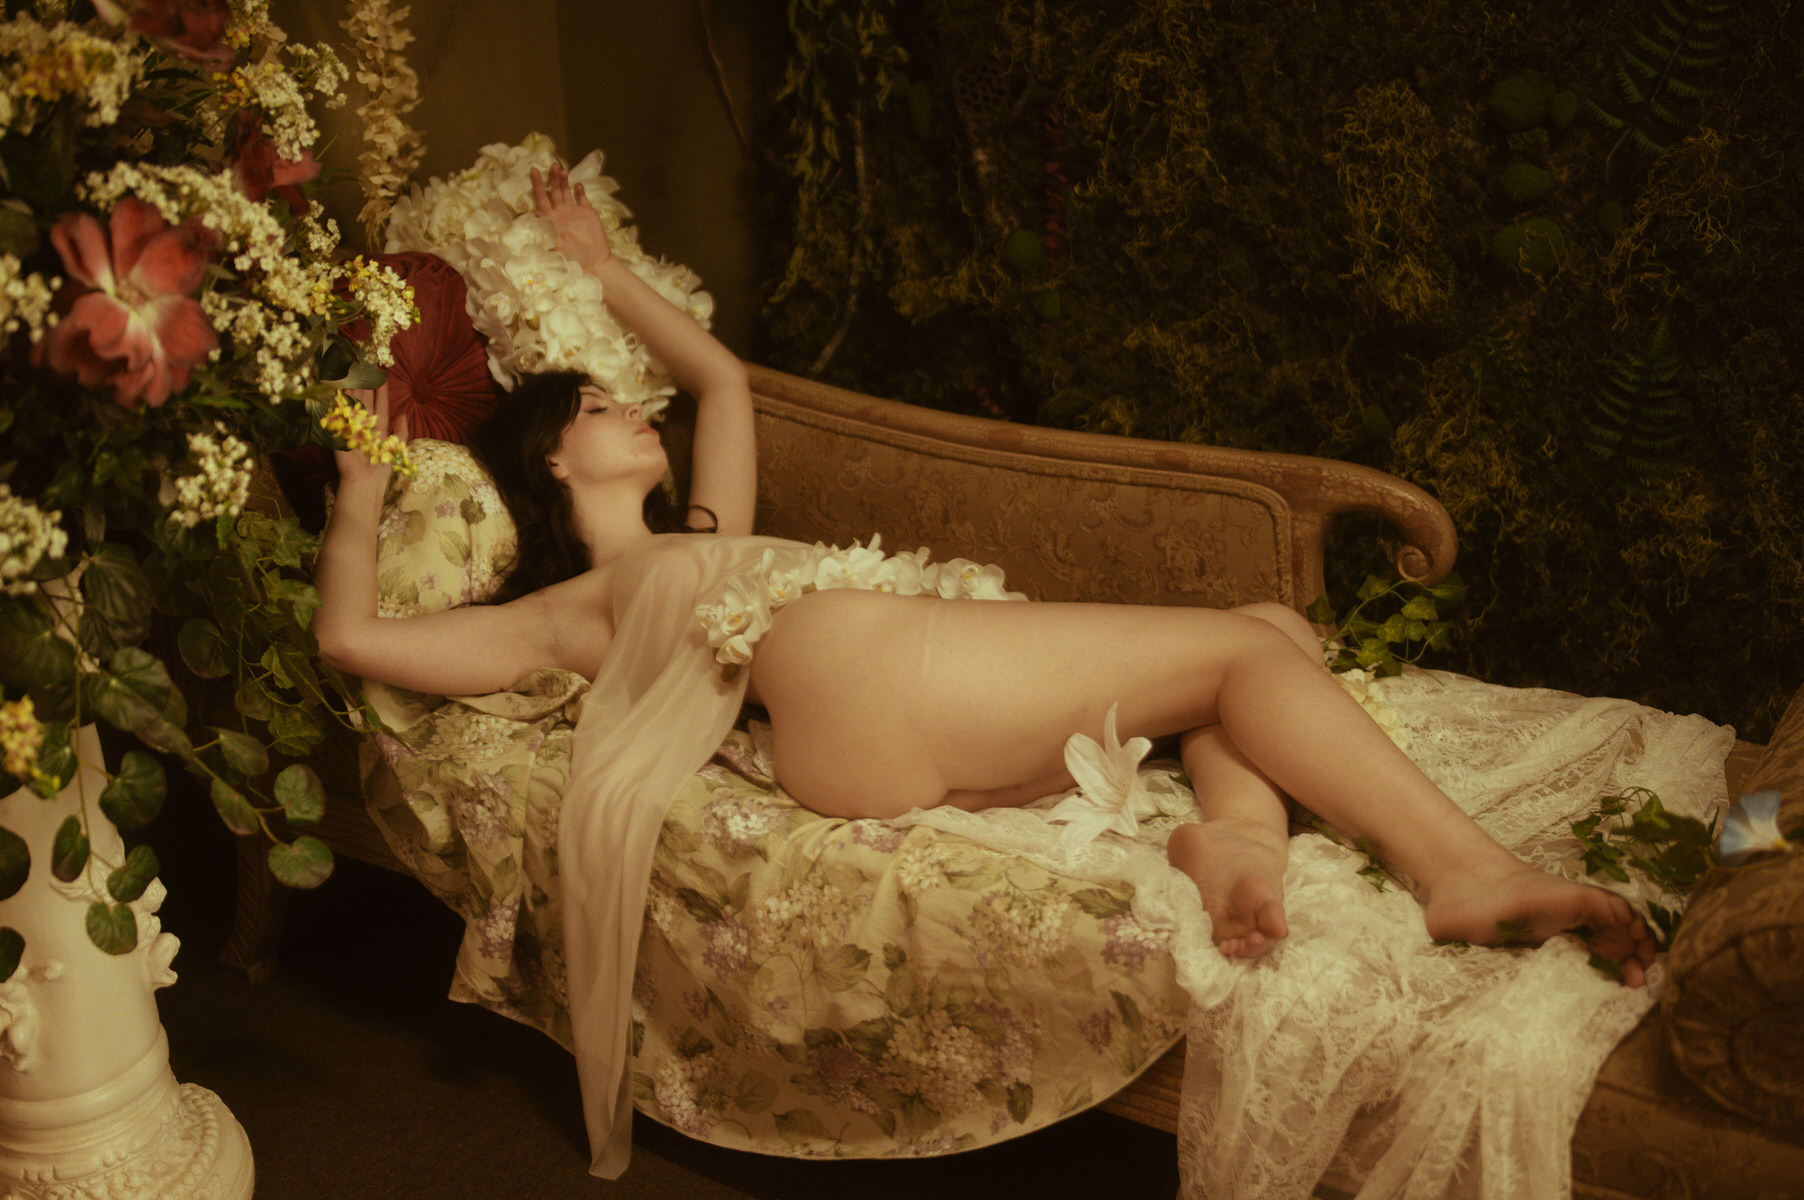 A woman posing for Dallas Boudoir Photography, surrounded by flowers on a couch.